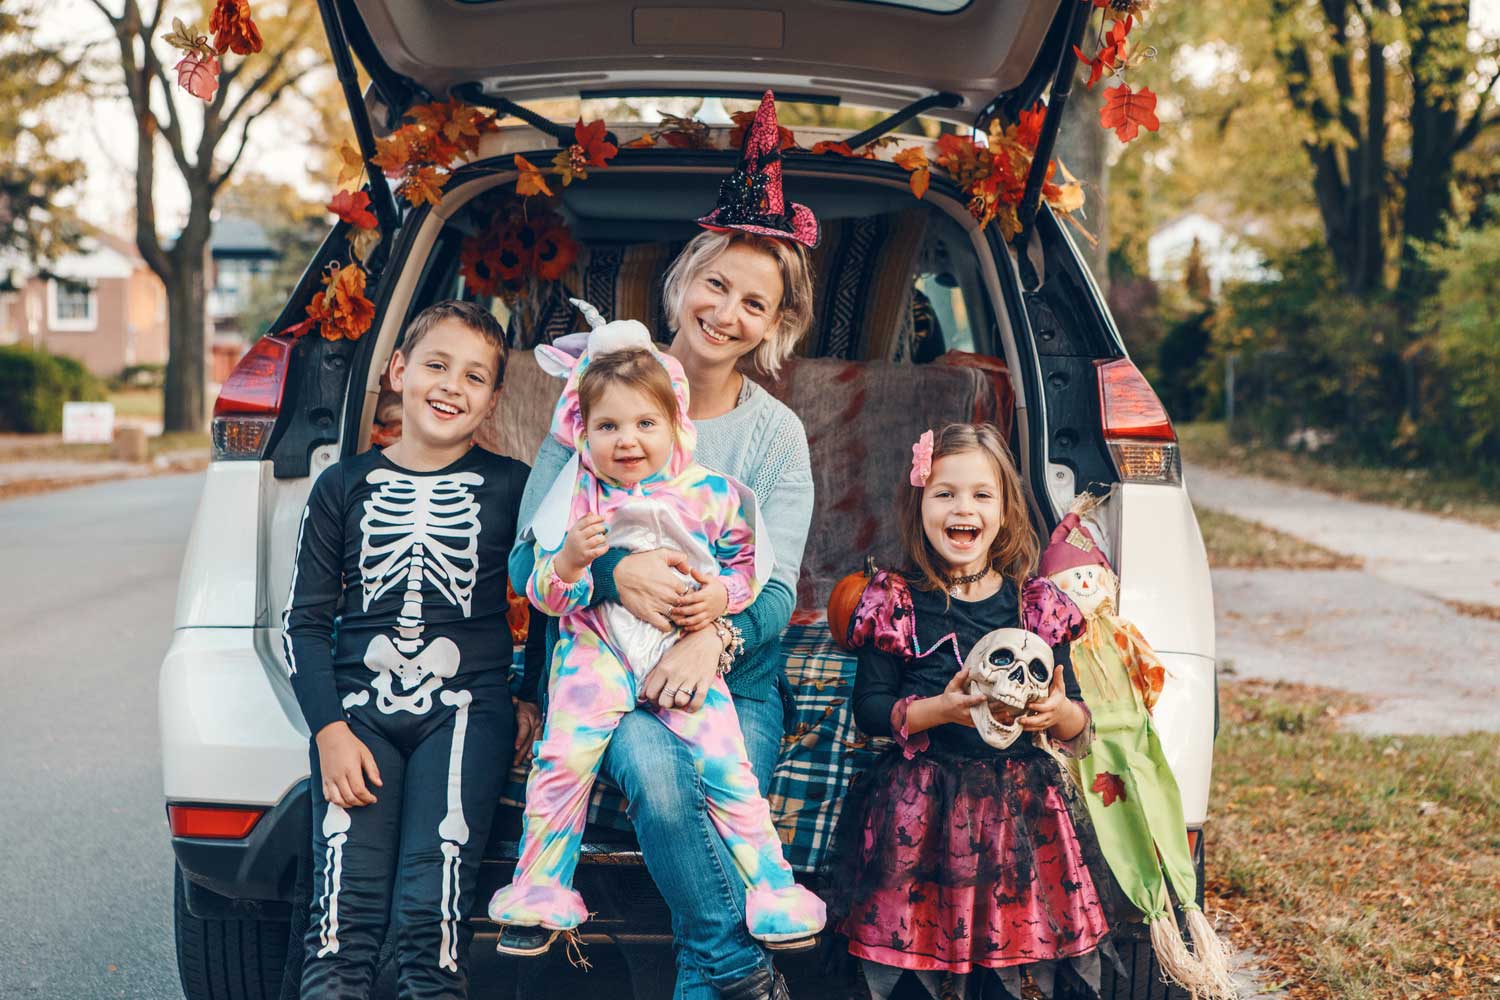 Halloween Events to Engage Your Community | Community Rec